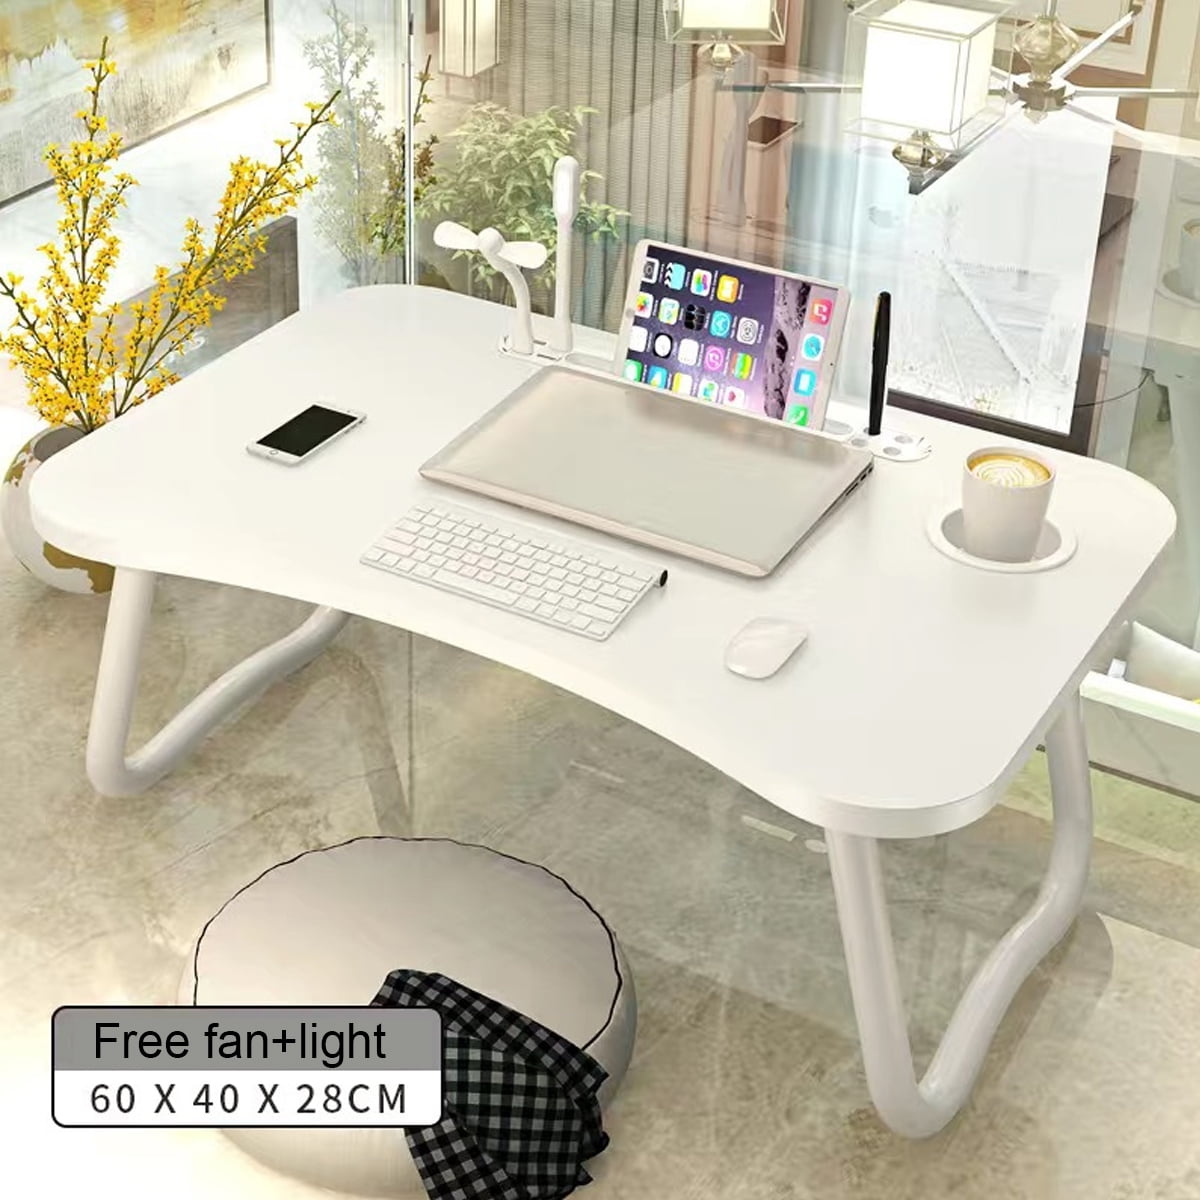 FreeQueen Adjustable Height Notebook Desk Tray Table Bed Table Flower Style Design Play Games Portable Bamboo Laptop Table Study Table With Drawer